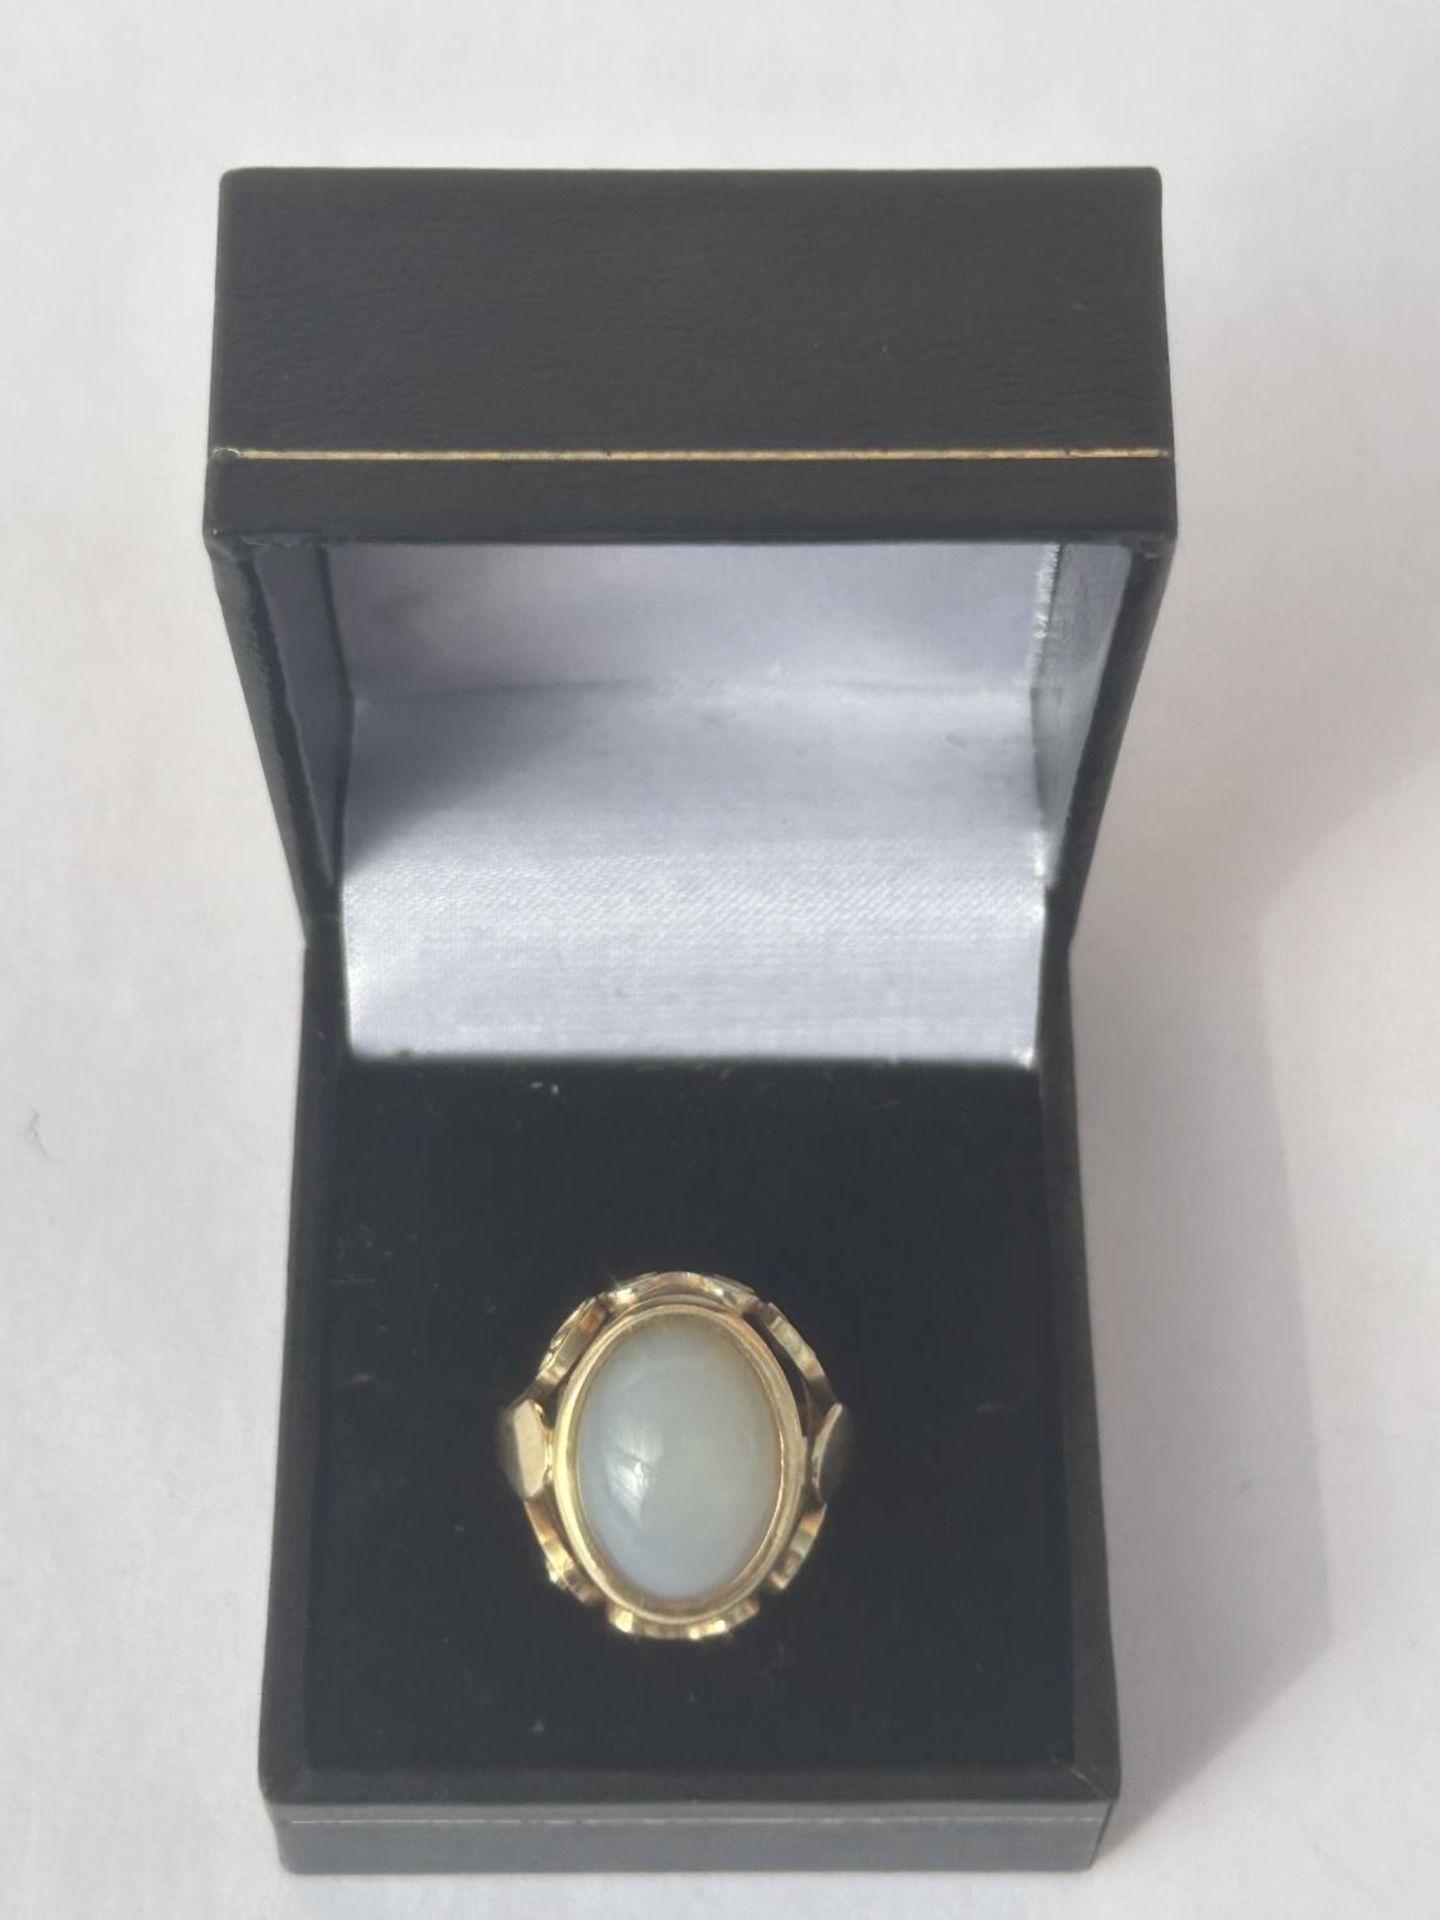 A 14CT GOLD WHITE QUARTZ CABOCHON DRESS RING, SIZE L, WEIGHT 5.11 G, COMPLETE WITH PRESENTATION BOX - Image 4 of 4